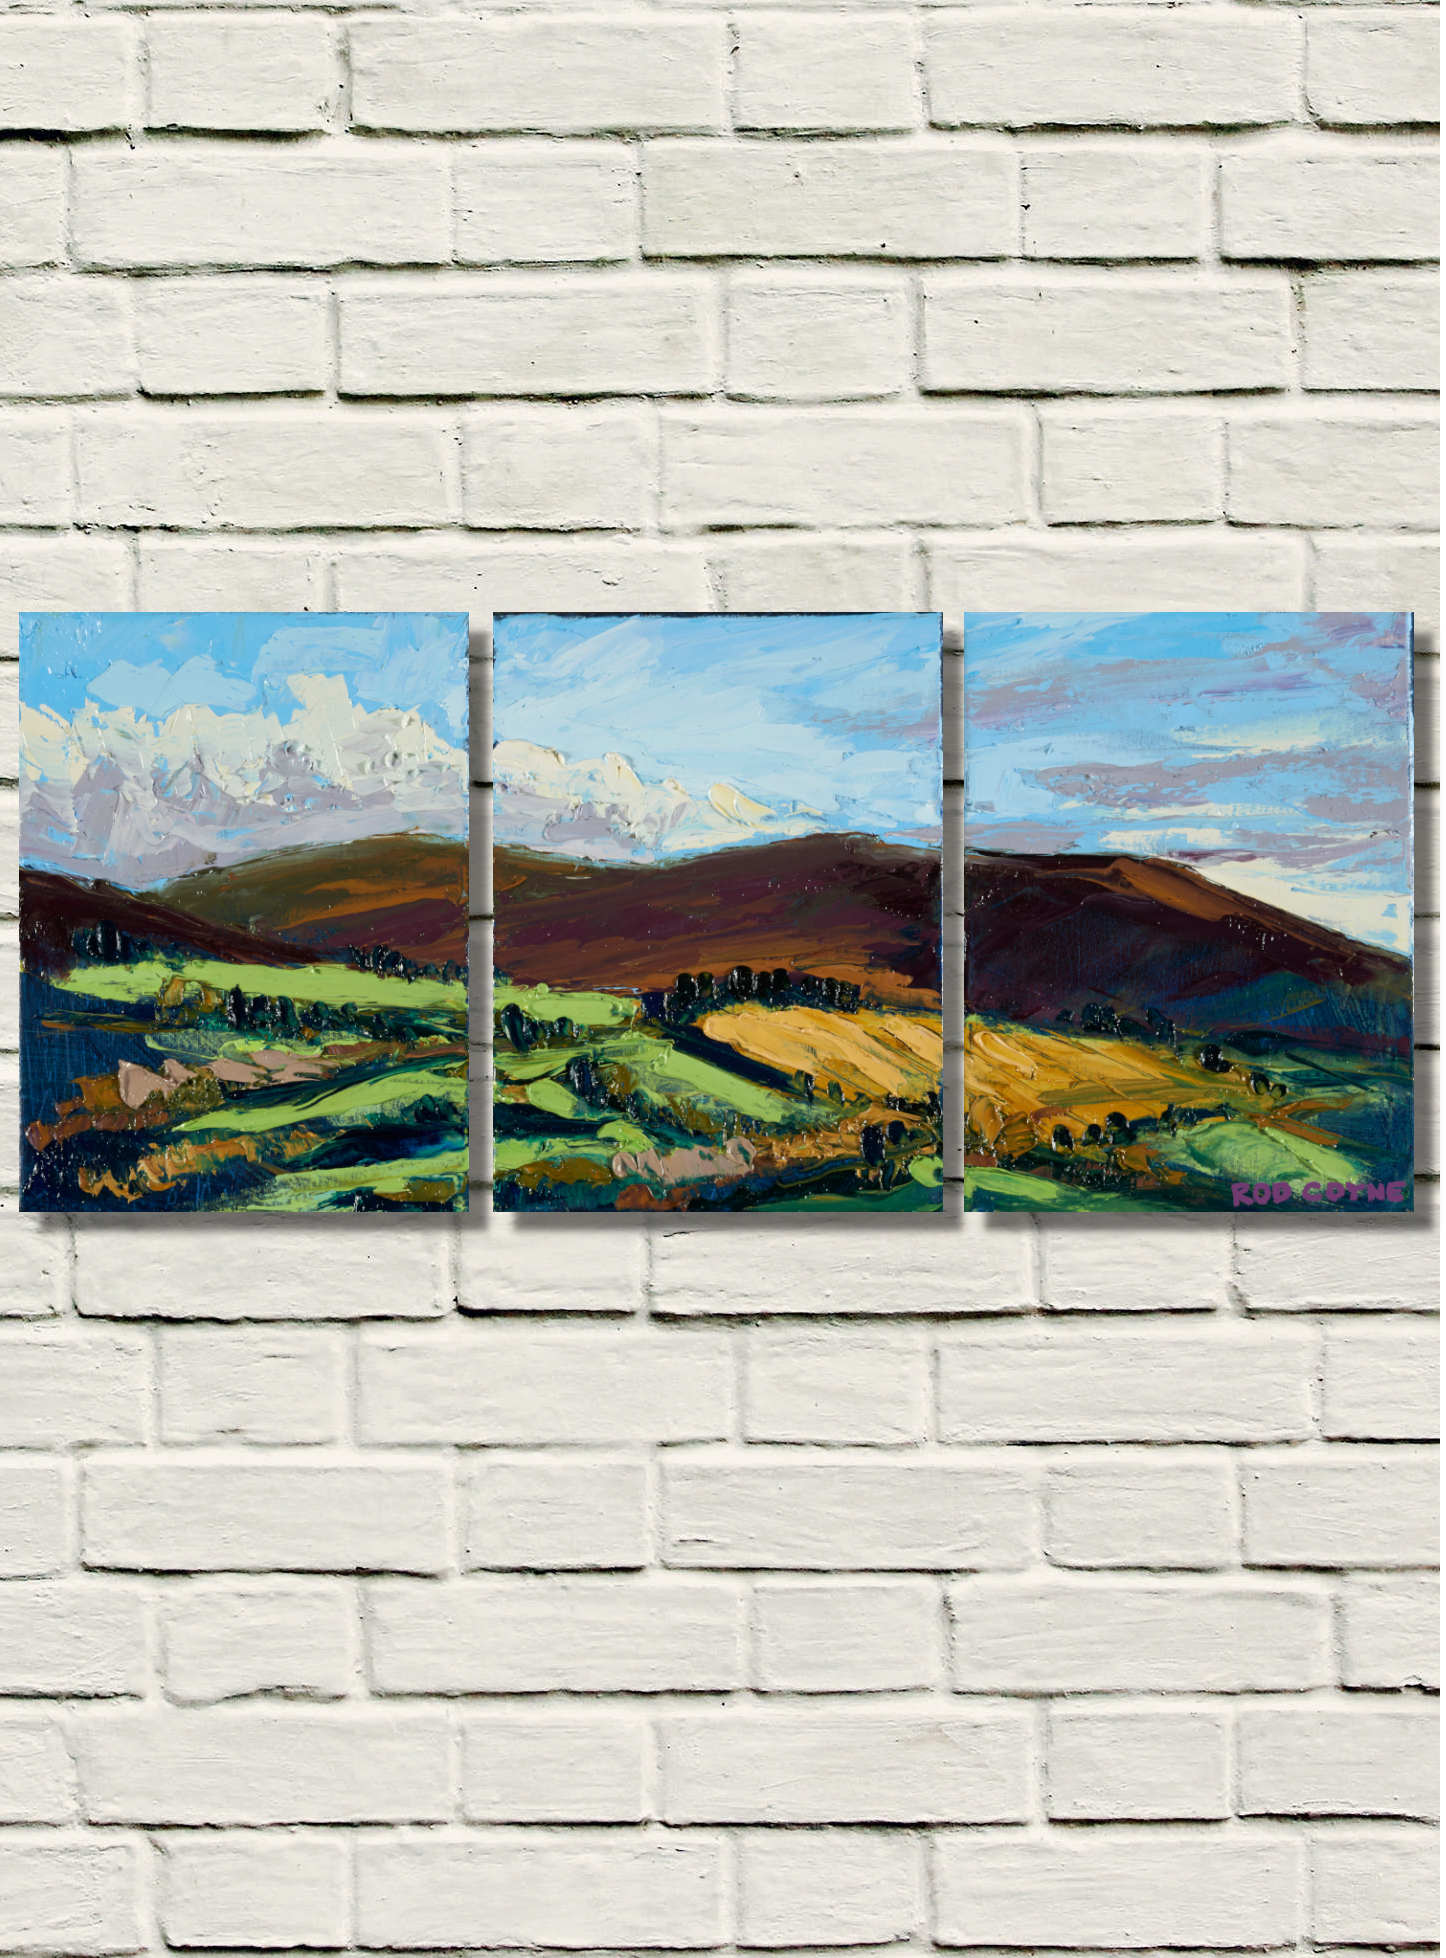 artist rod coyne's triptych painting "Croghan from Aughrim" is shown here on a white brick wall.